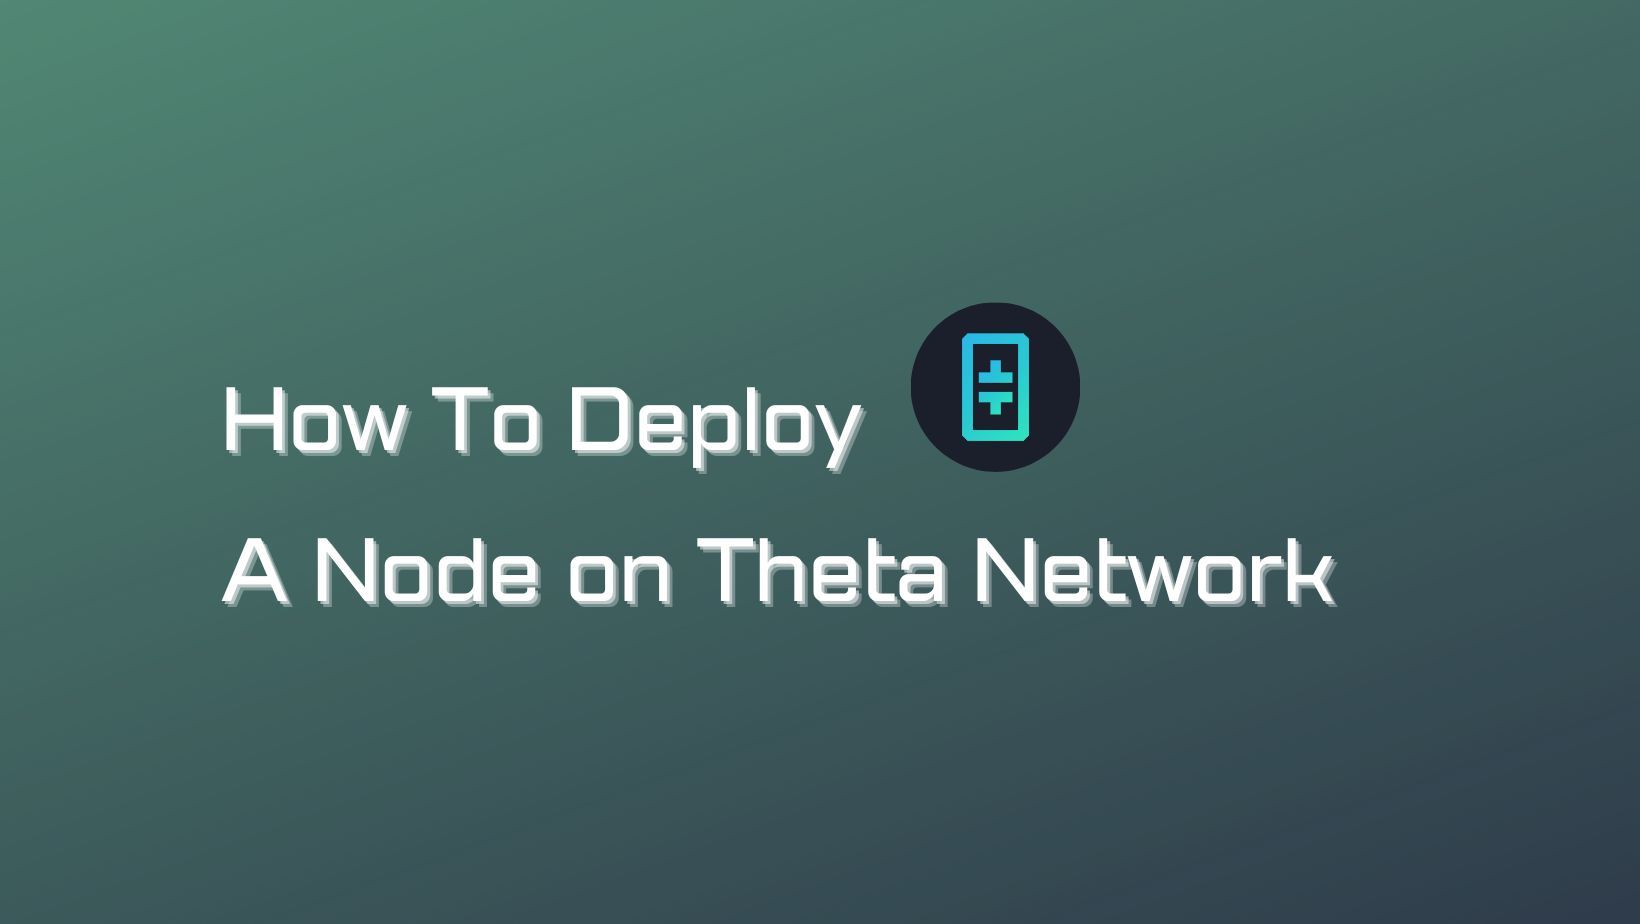 How to Deploy a Node on Theta Network